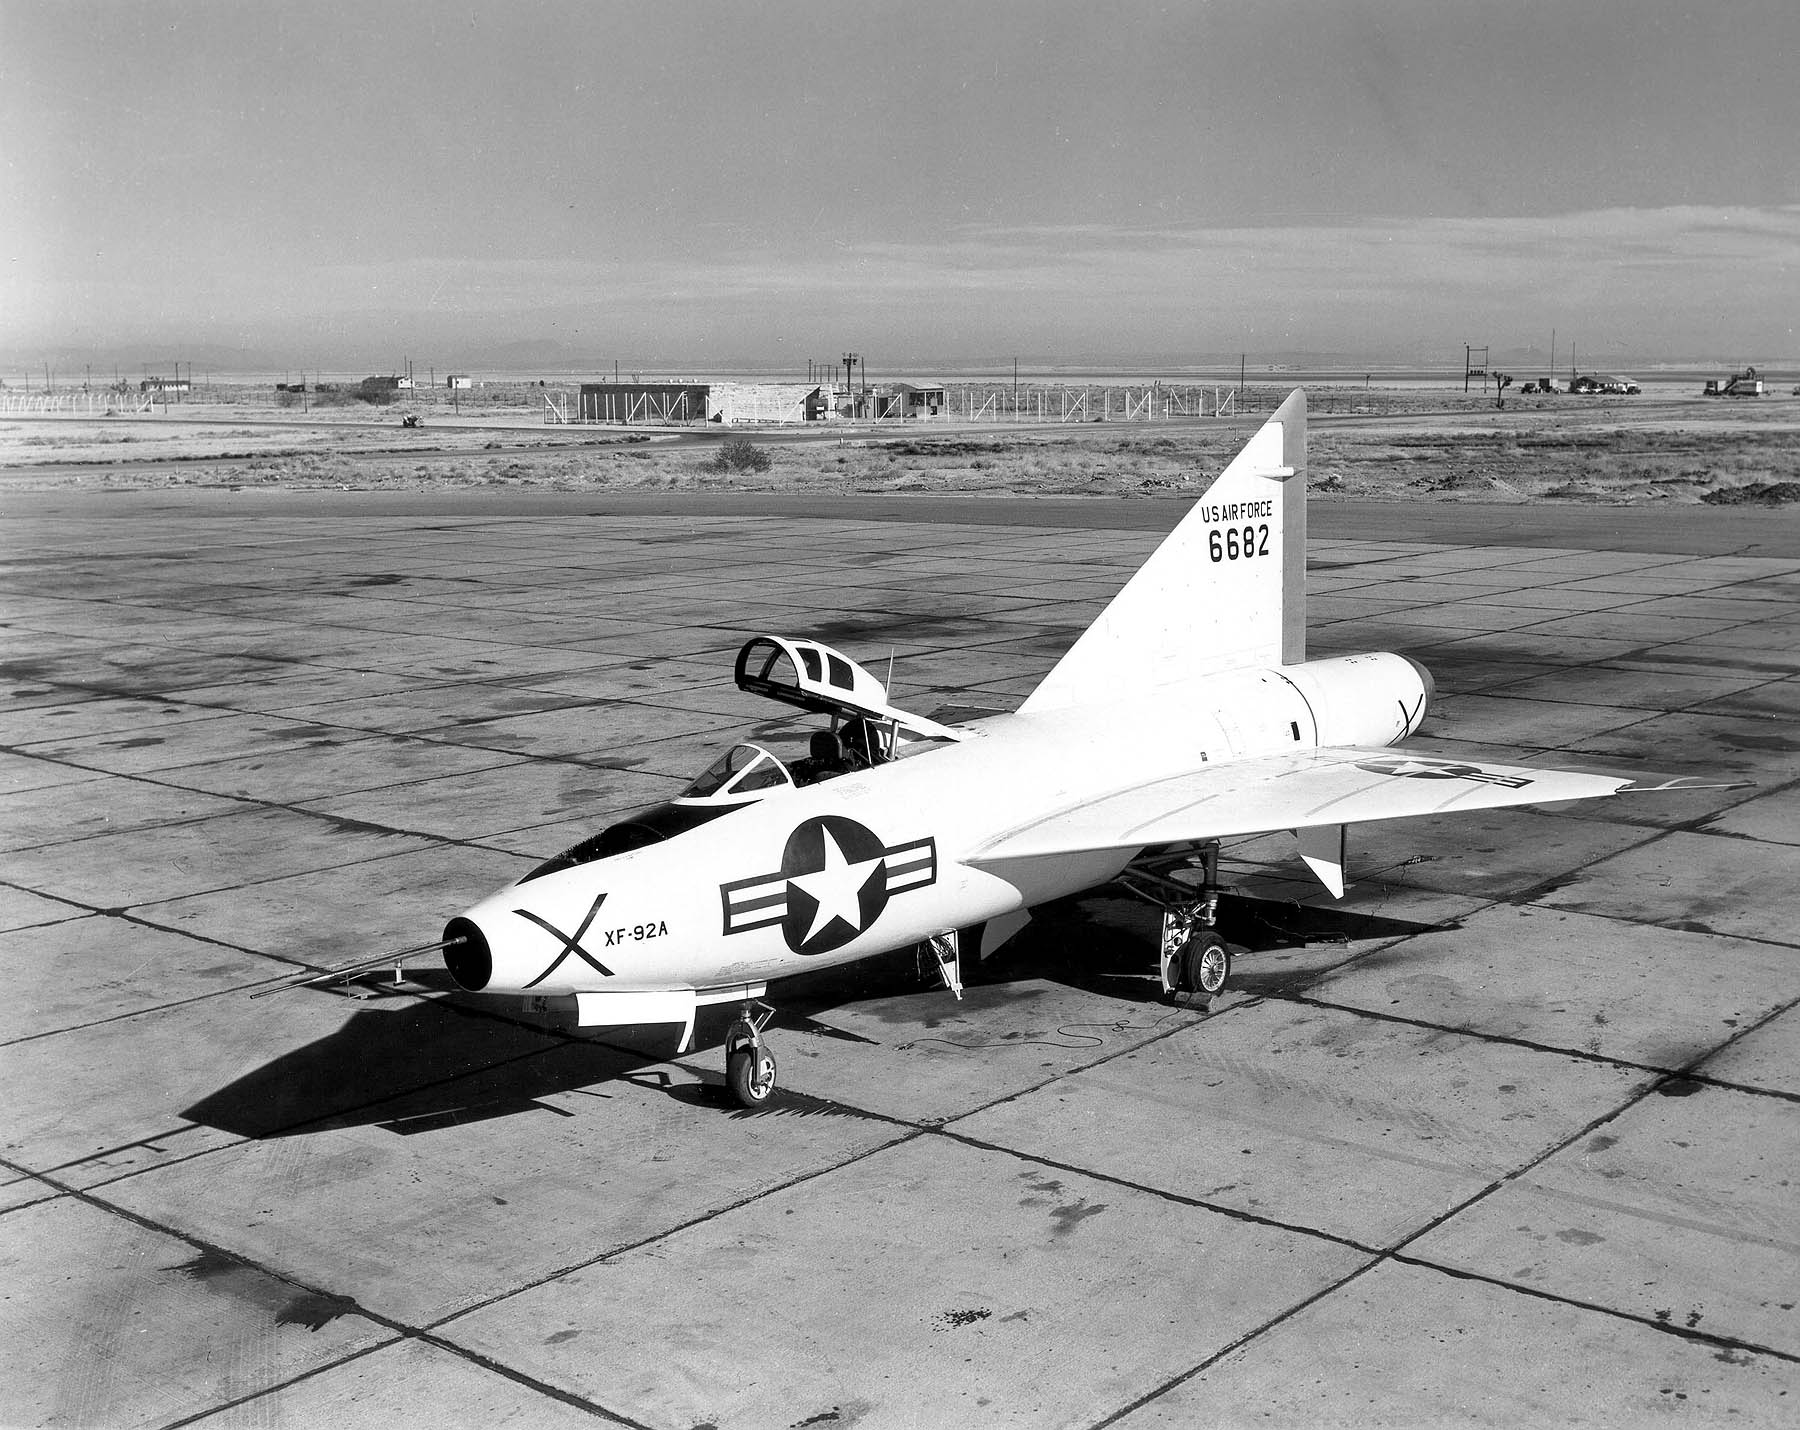 Edwards AFB was where most of the testing was done.